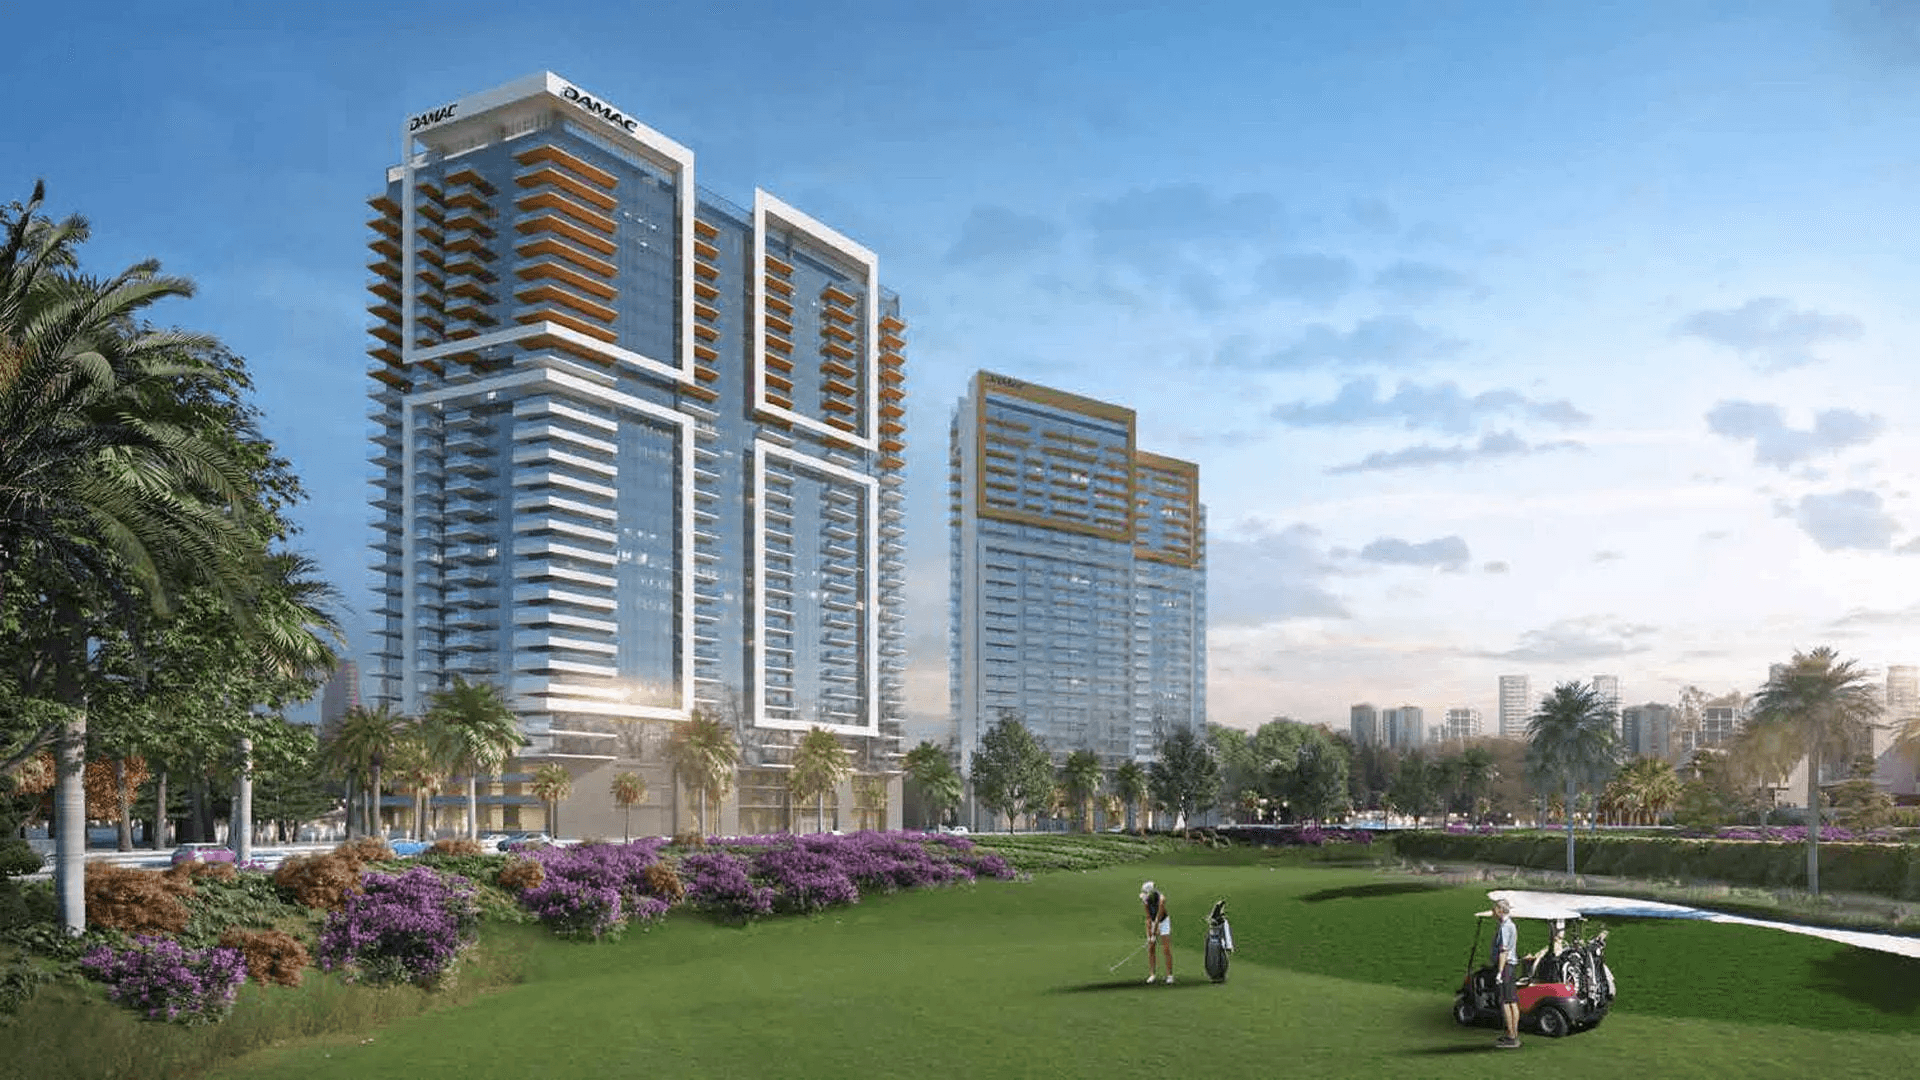 Exclusive residential complex with golf courses and swimming pools - Dubai